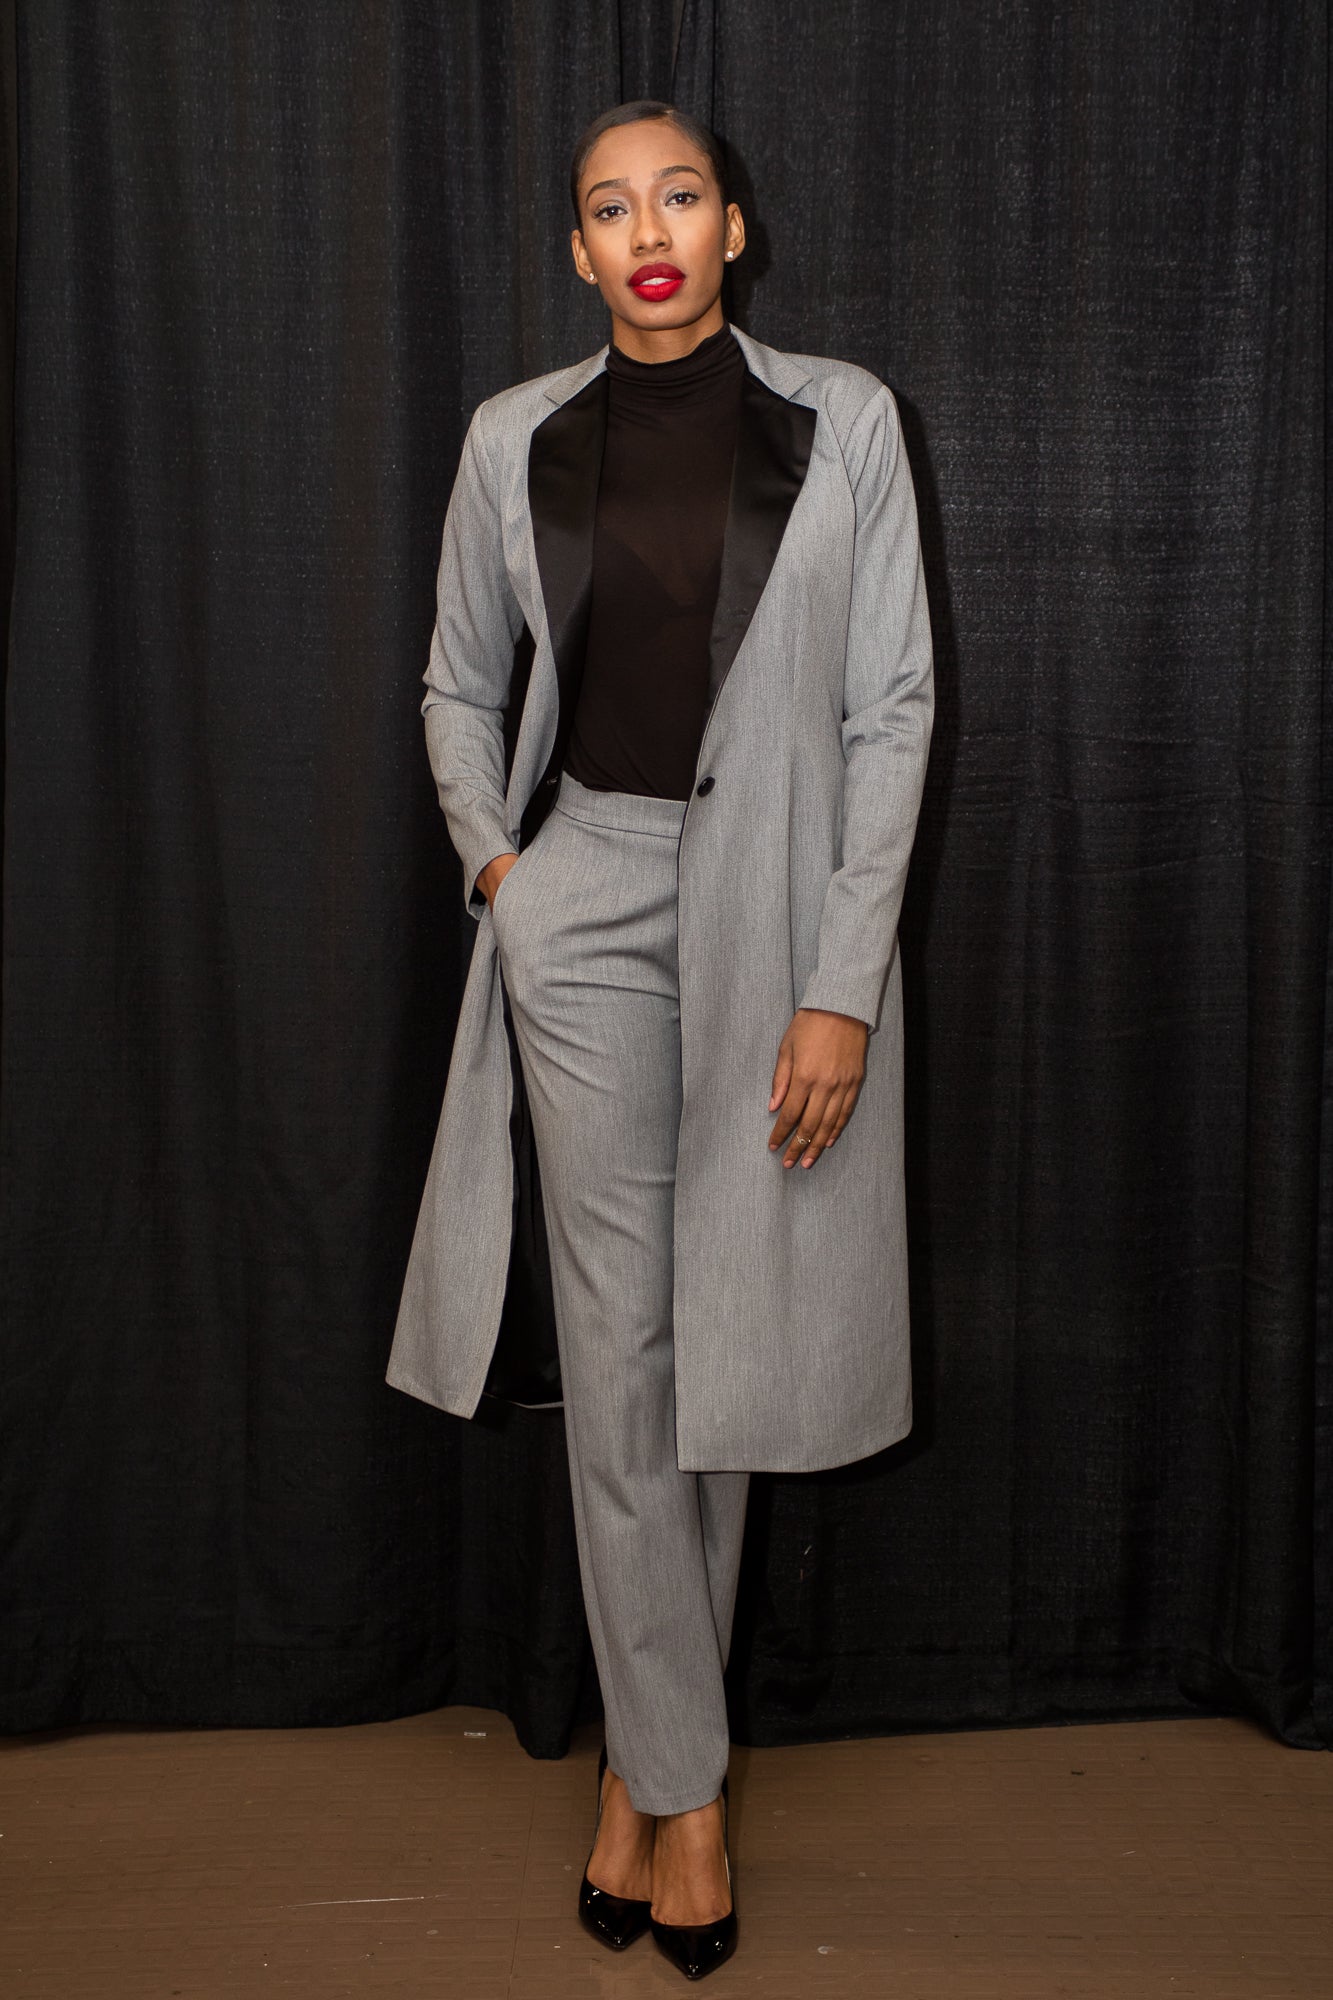 A Lesson in True Style from African Diaspora Awards